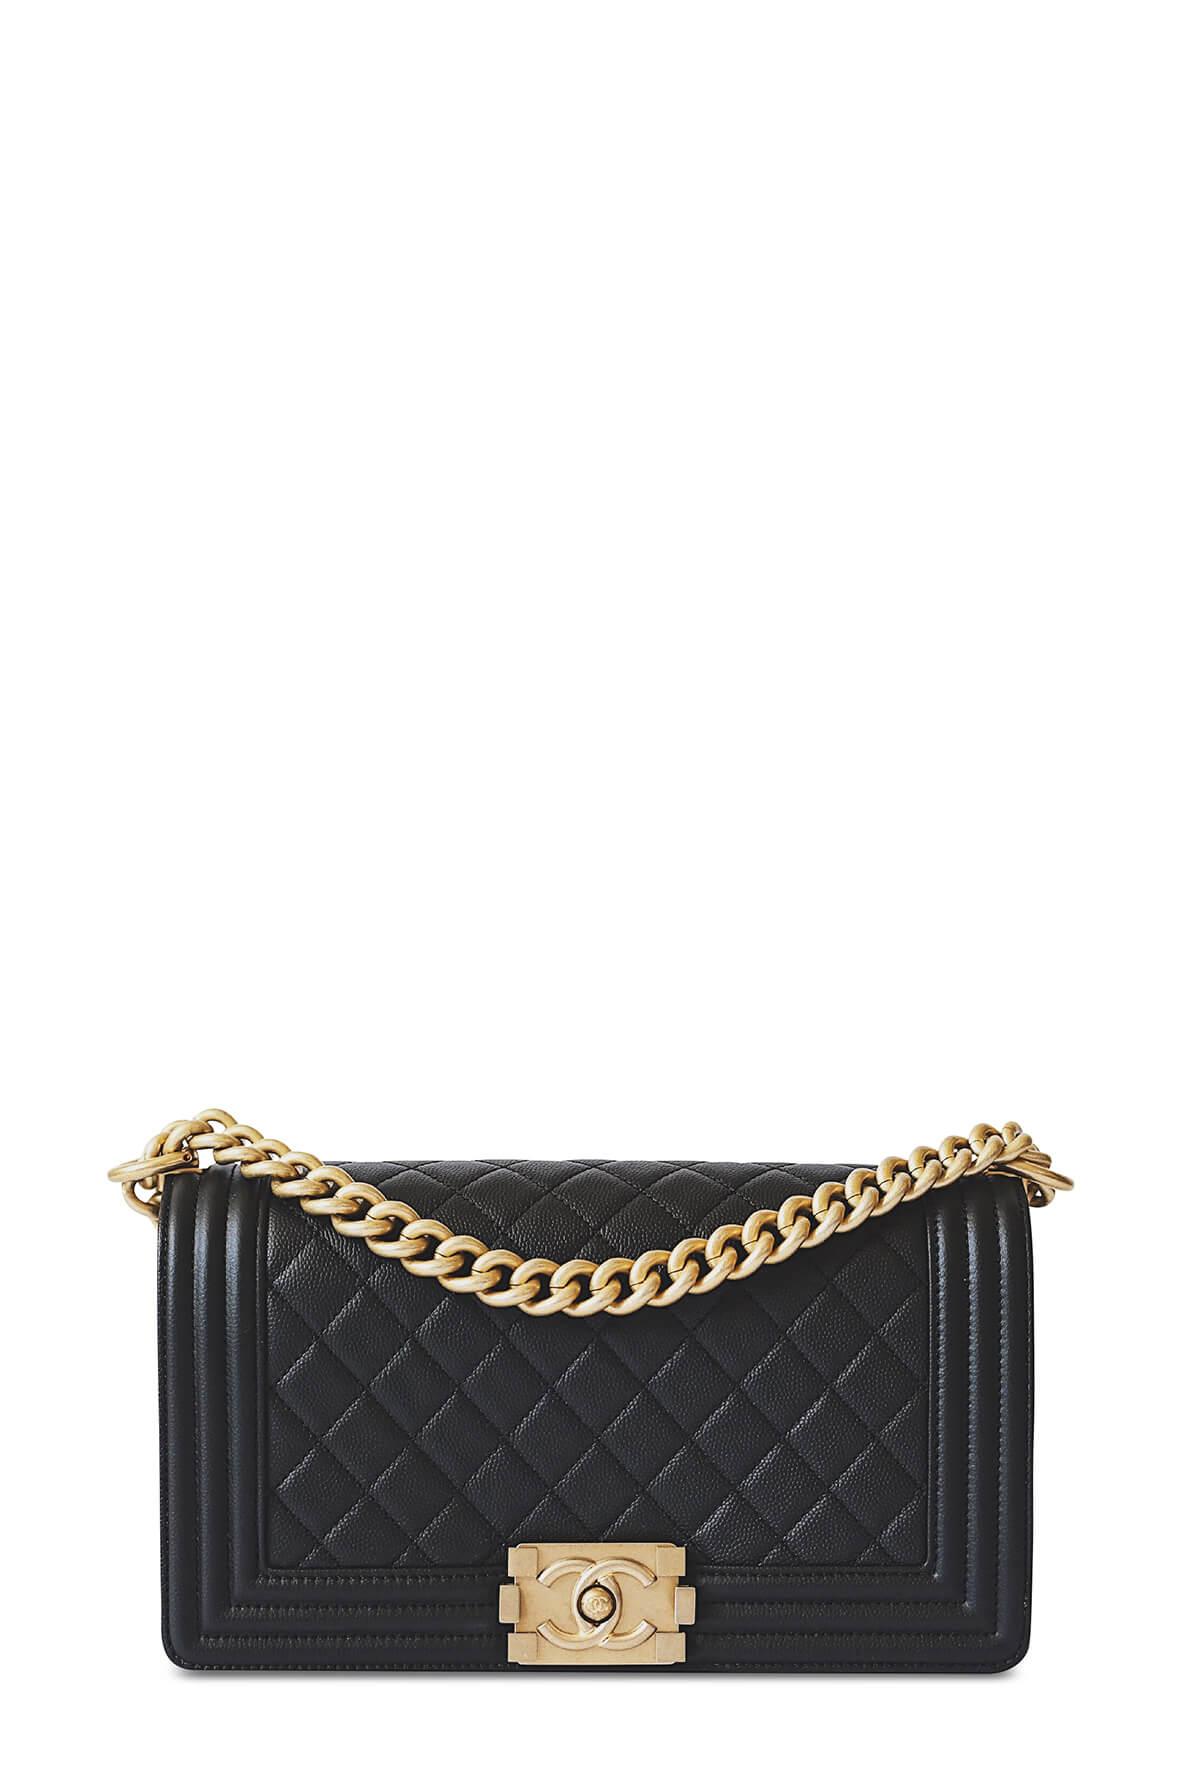 Quilted Caviar Old Medium Boy Black with Gold Hardware – Style Theory SG